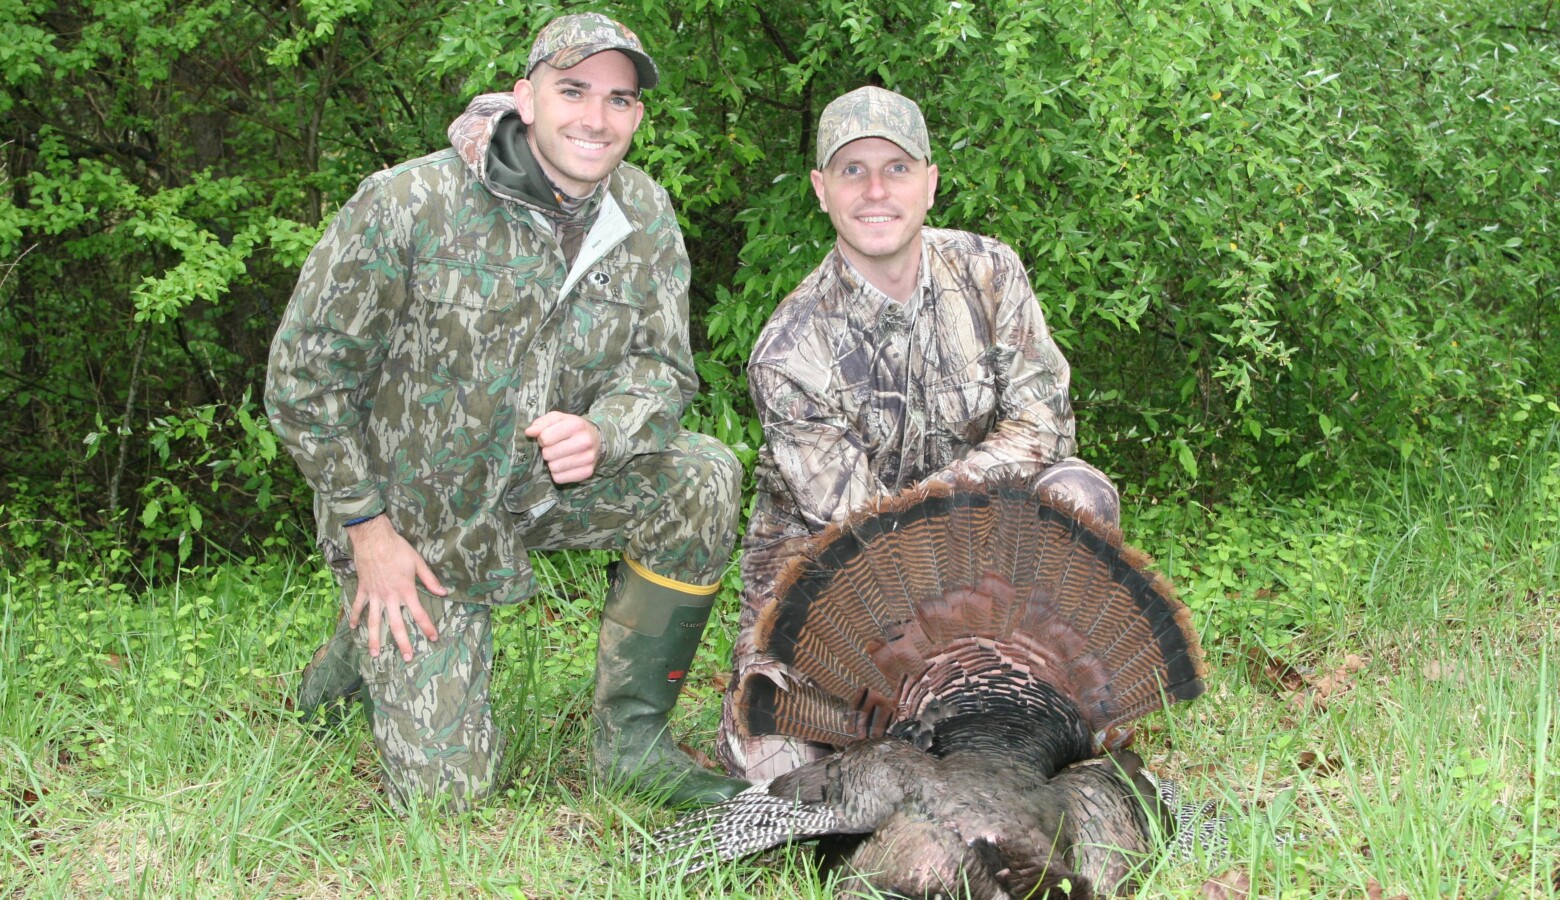 Kyle Allen, a Virginia state law enforcement officer, and Capt. Jacob Johnson, Marine Corps Systems Command, pose with a 20-pound turkey Johnson shot during a hunt at a Virginia Marine Corps base in 2016. (Adele Uphaus-Conner/U.S. Marine Corps)